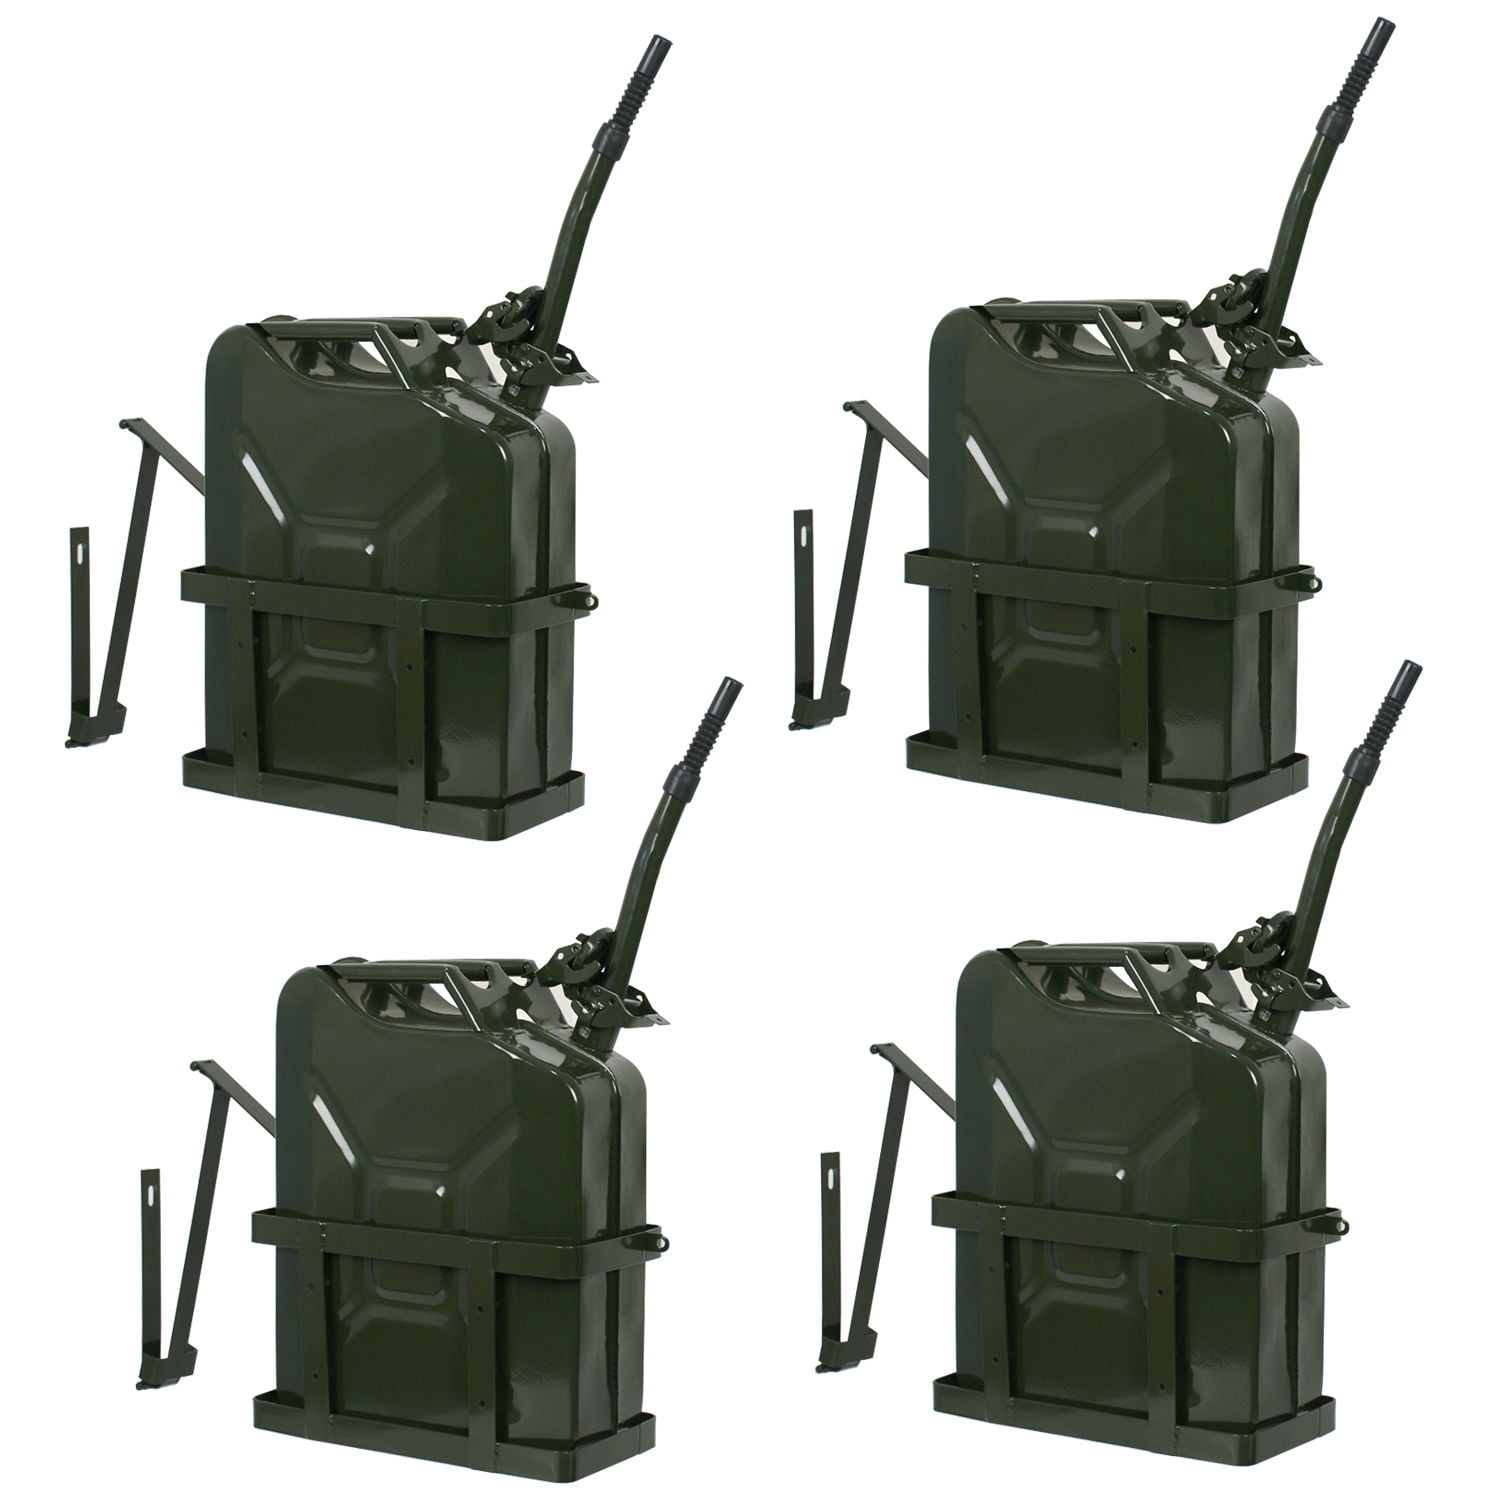 5 Gallon Jerry Can Gasoline Fuel Gas Steel Nato Tank Emergency Backup Container 